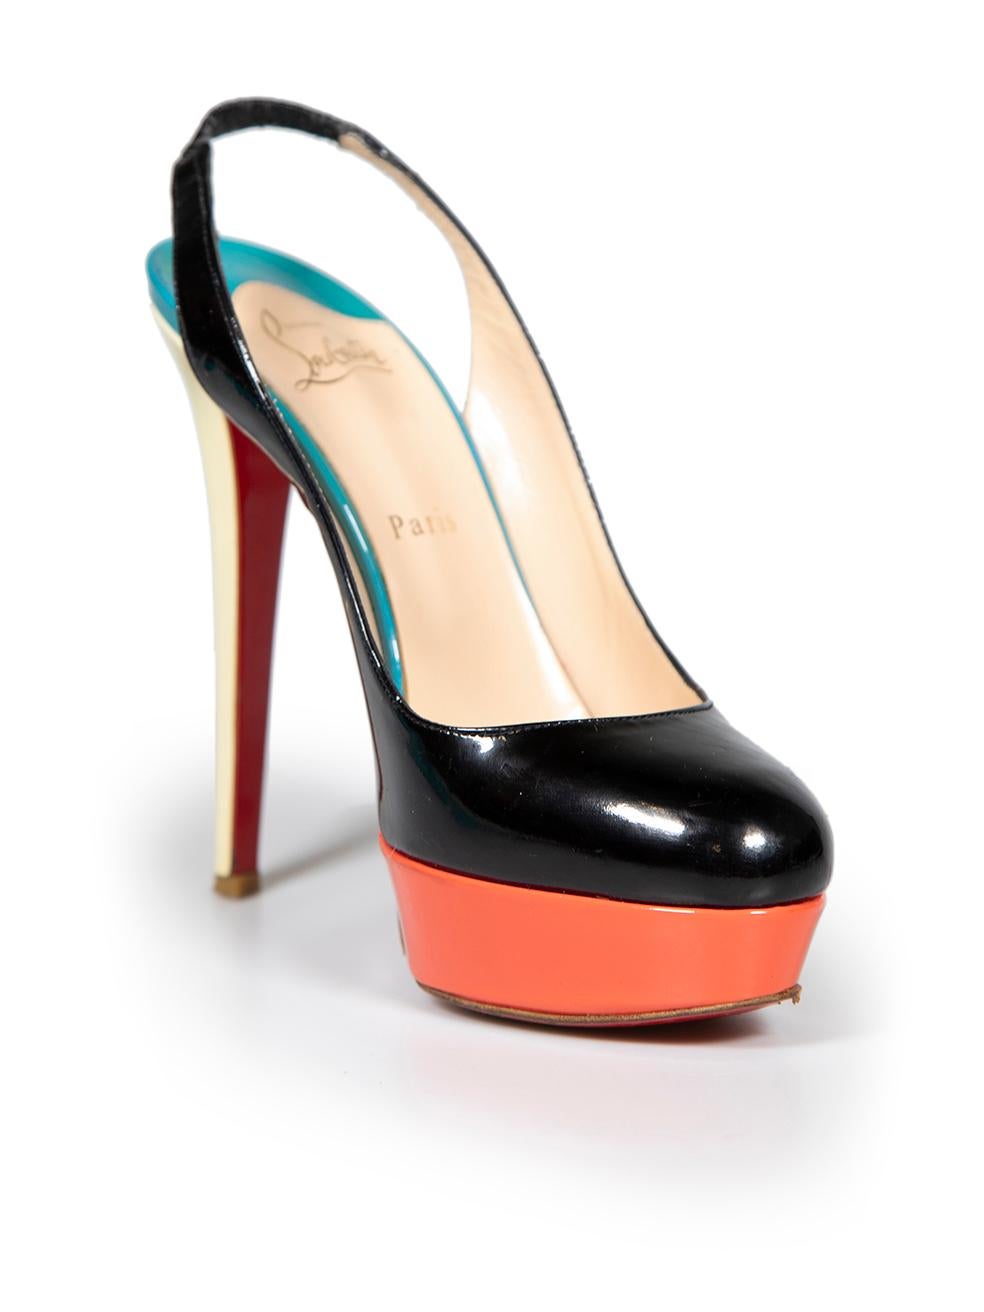 CONDITION is Good. Minor wear to pumps is evident. Light wear to insoles, and platform outsoles with marks to the patent leather. There is some cracking to the patent elastic back and moderate wear to the soles on this used Christian Louboutin